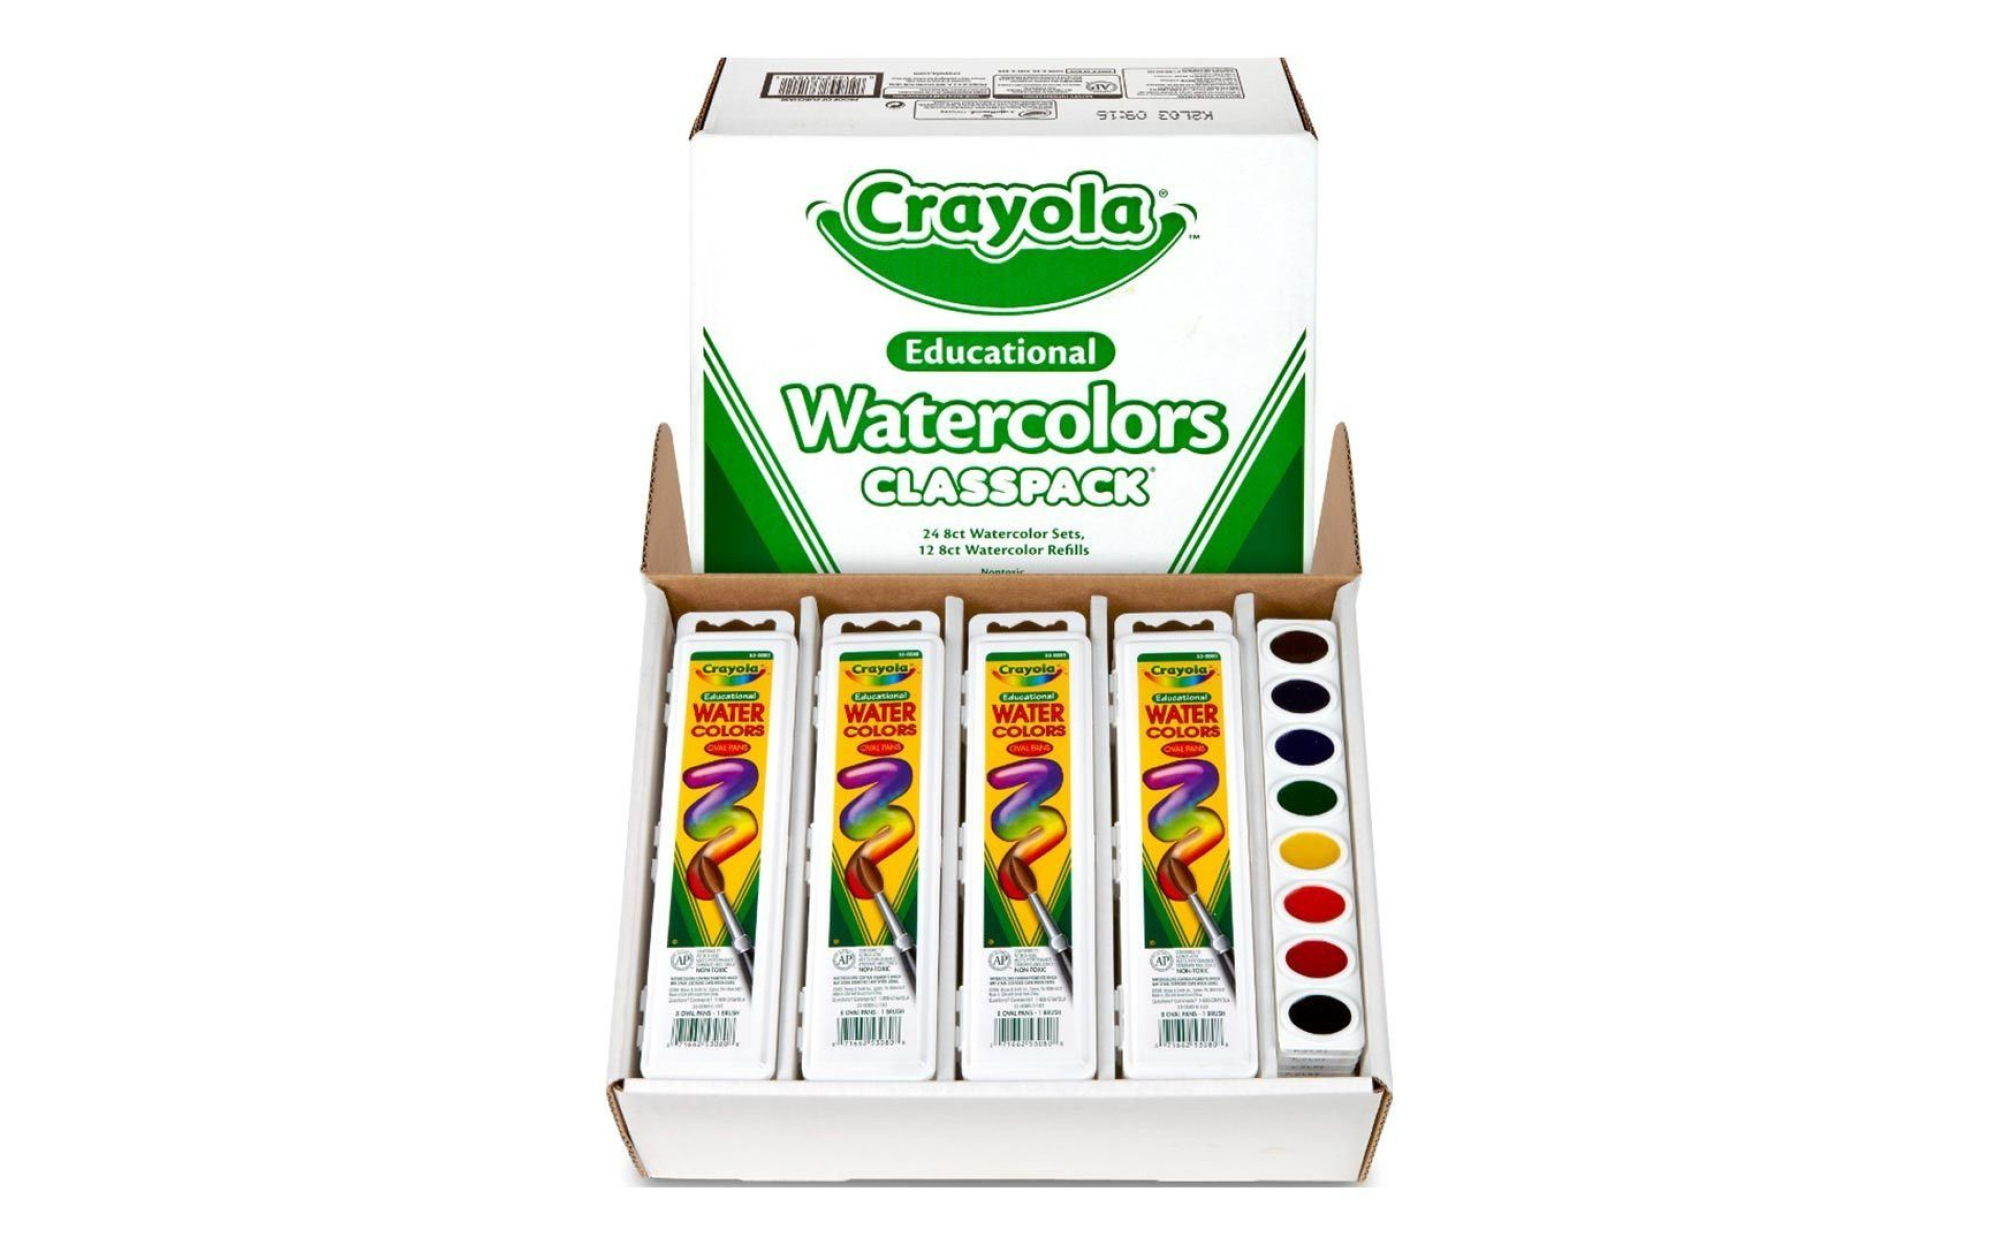 Crayola My First Washable Watercolors & Brush, Large Paints, Toddler Art  Supplies, 1 Pack (4 Count Colors with a Paint Brush)